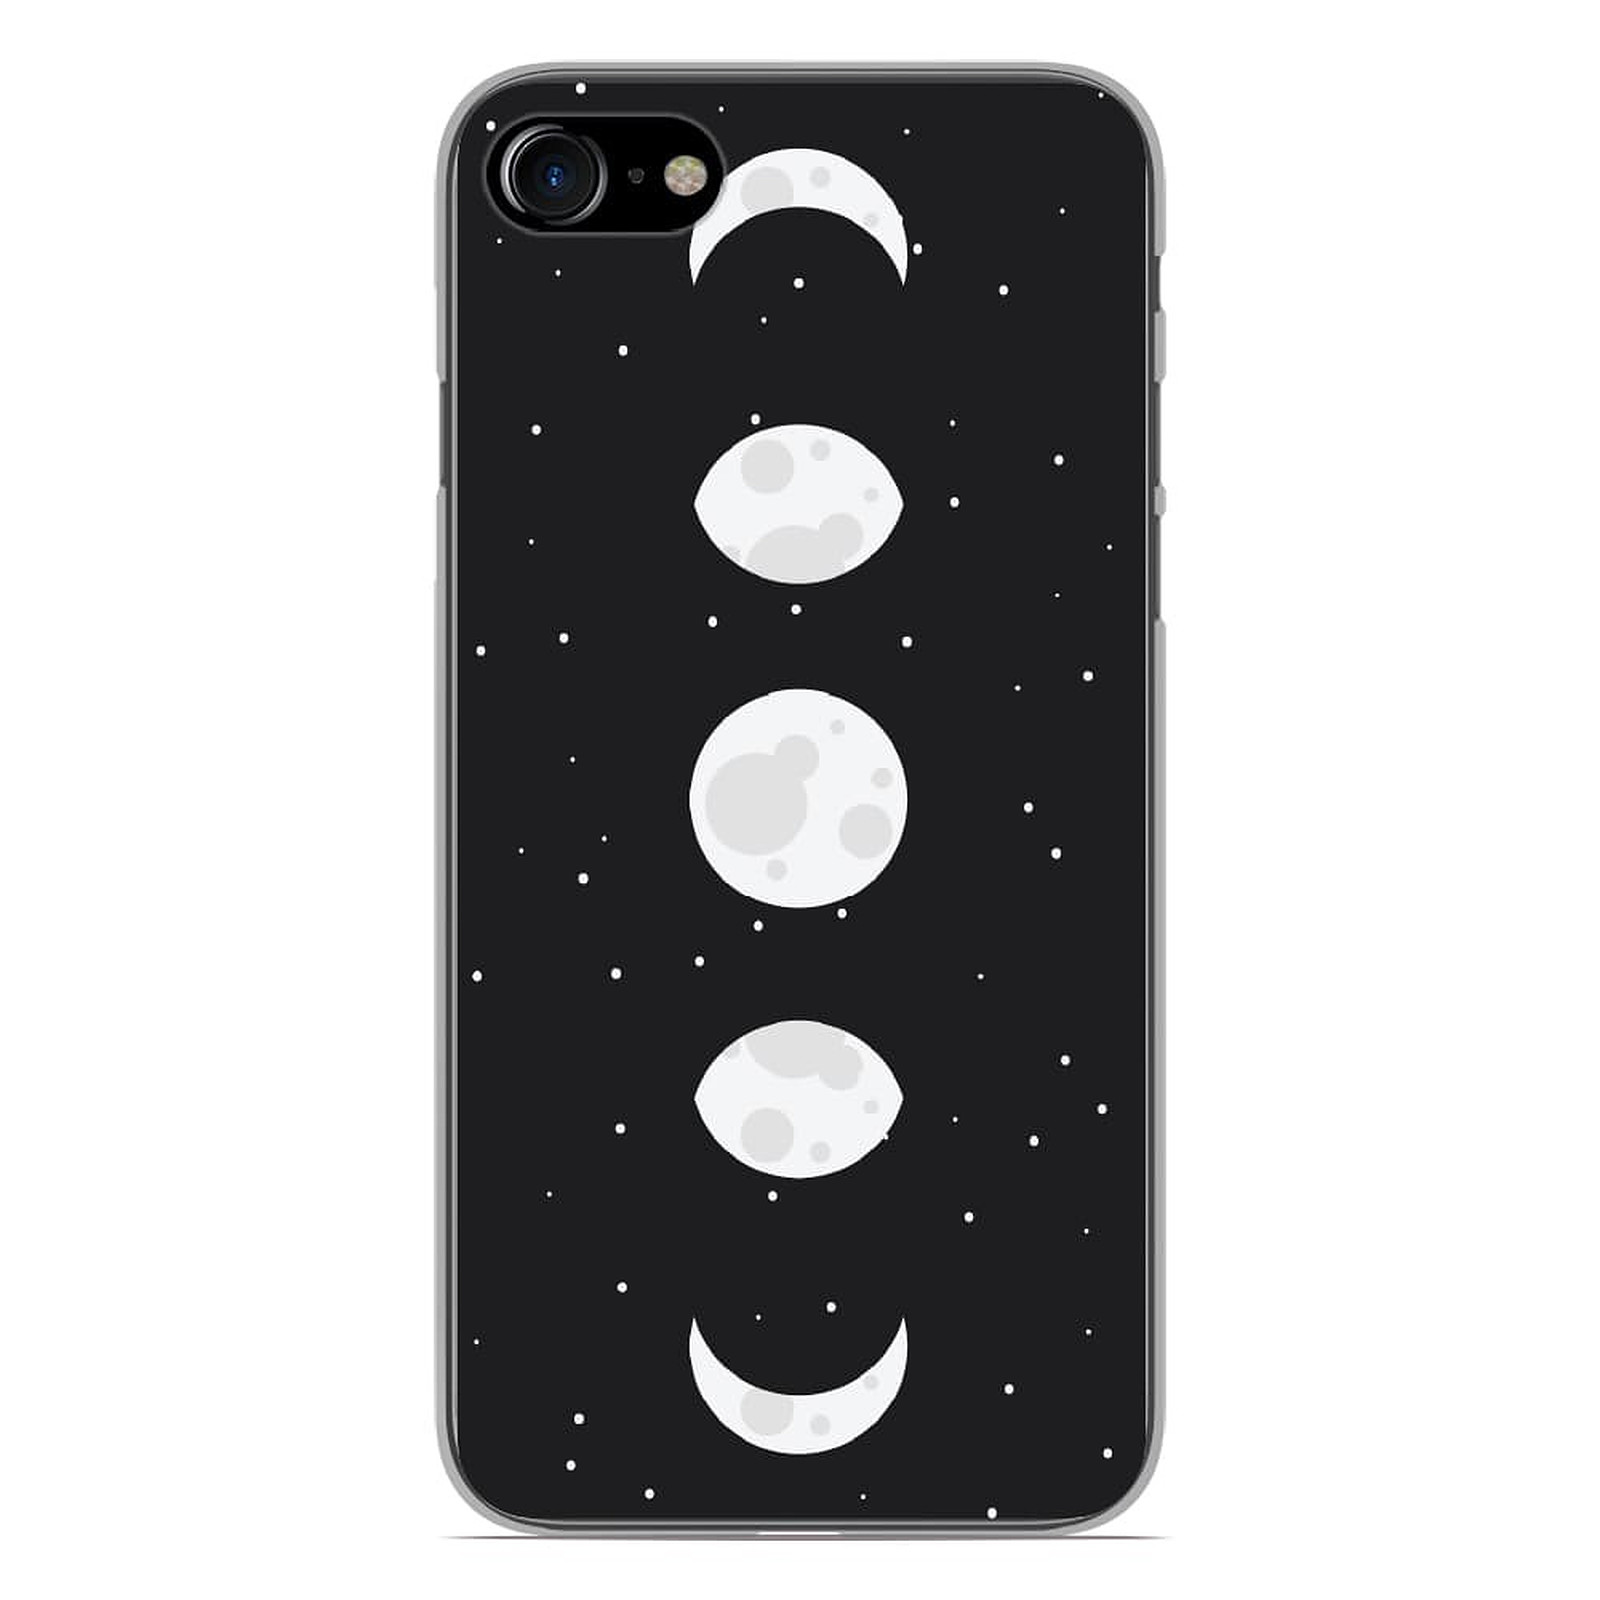 1001 Coques Coque silicone gel Apple iPhone 7 motif Phase de Lune - Coque telephone 1001Coques